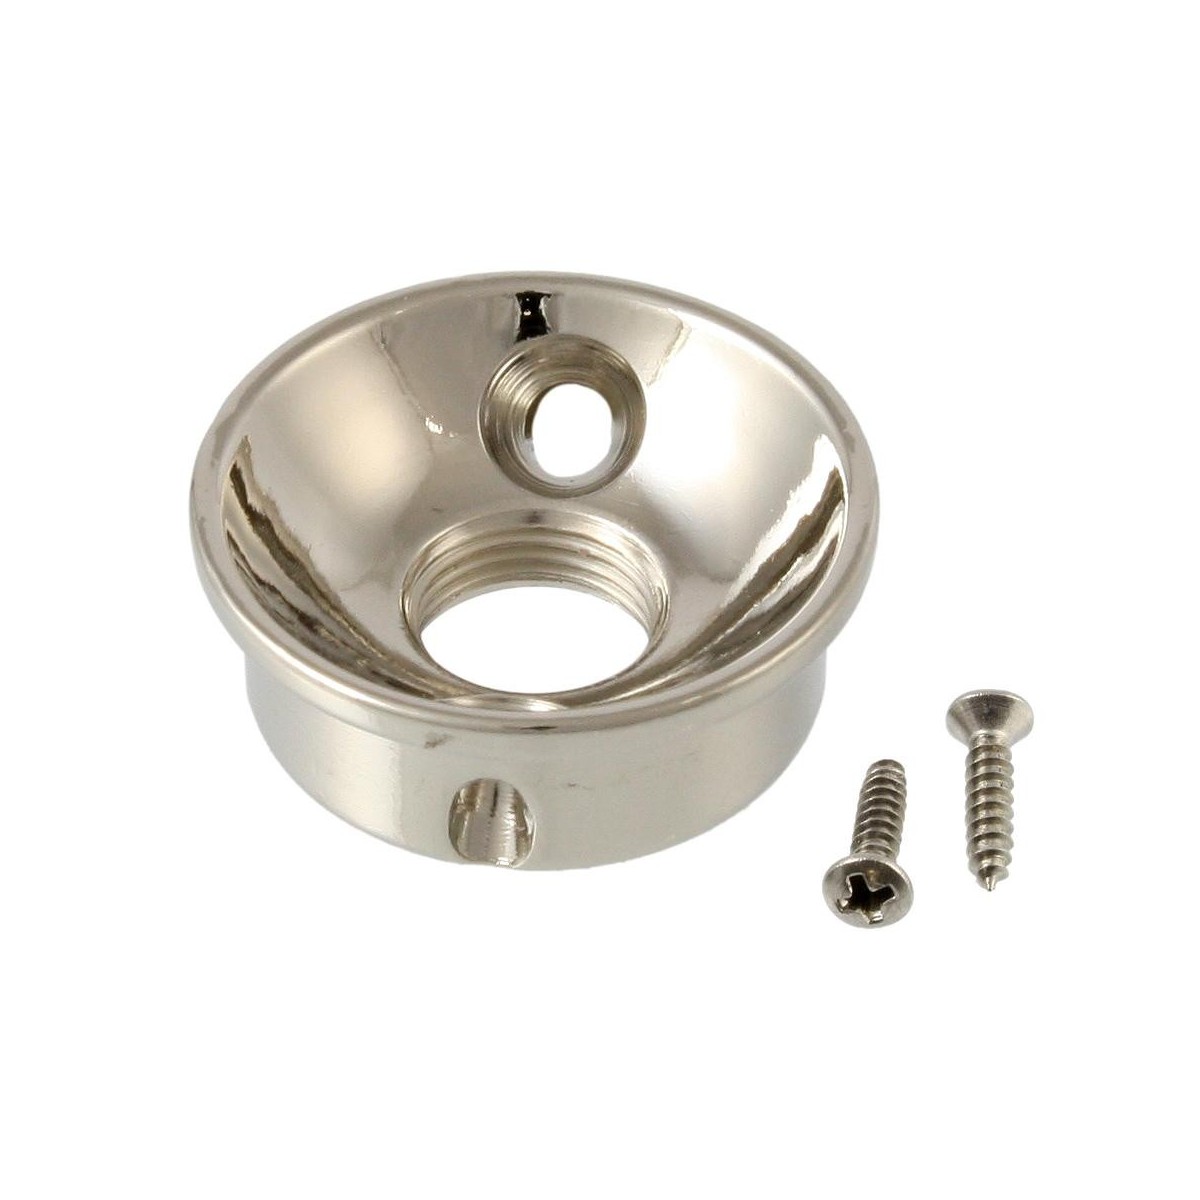 ALLPARTS JACK CUP FOR TELECASTER NICKEL